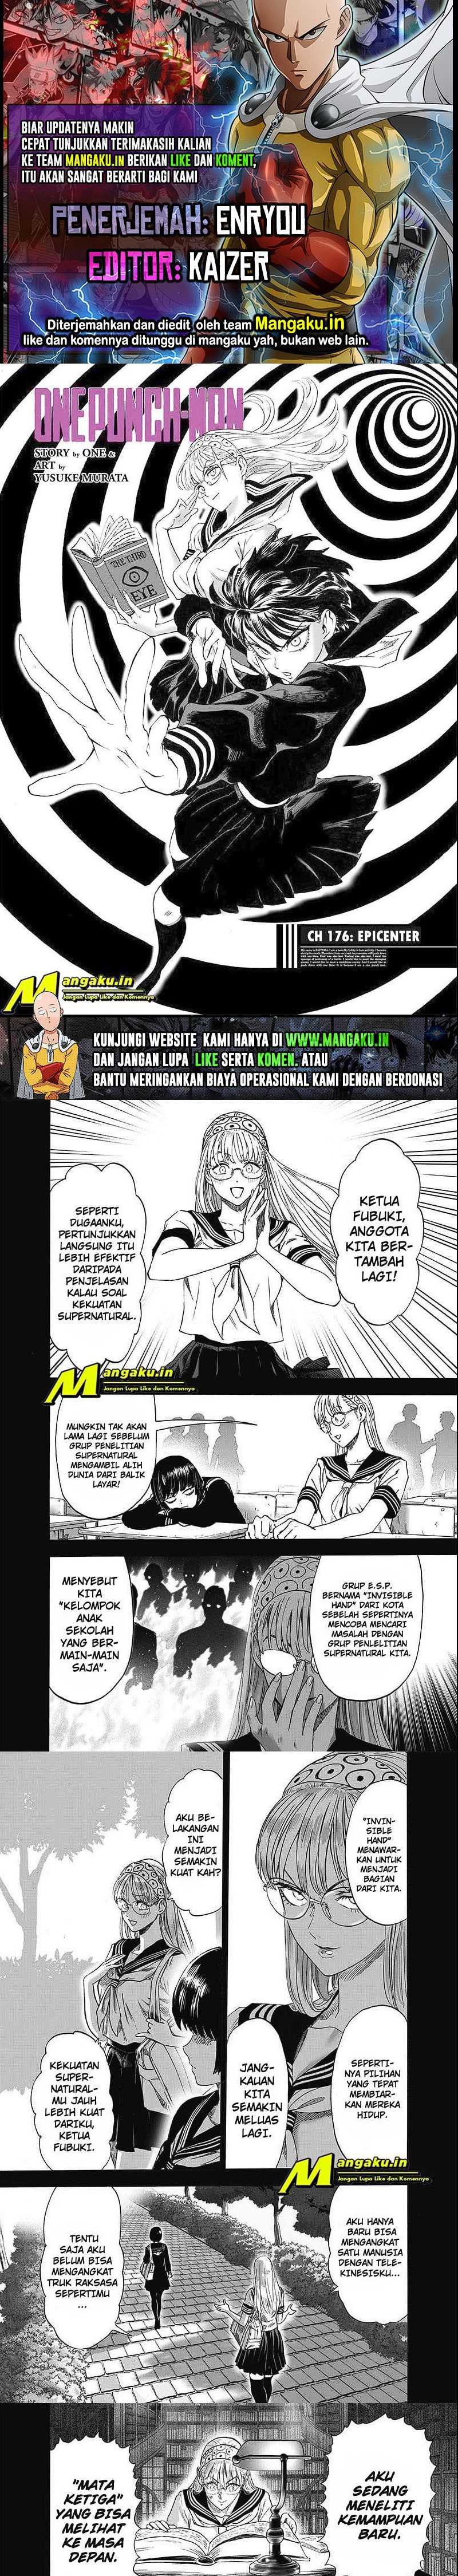 One Punch Man Chapter 226